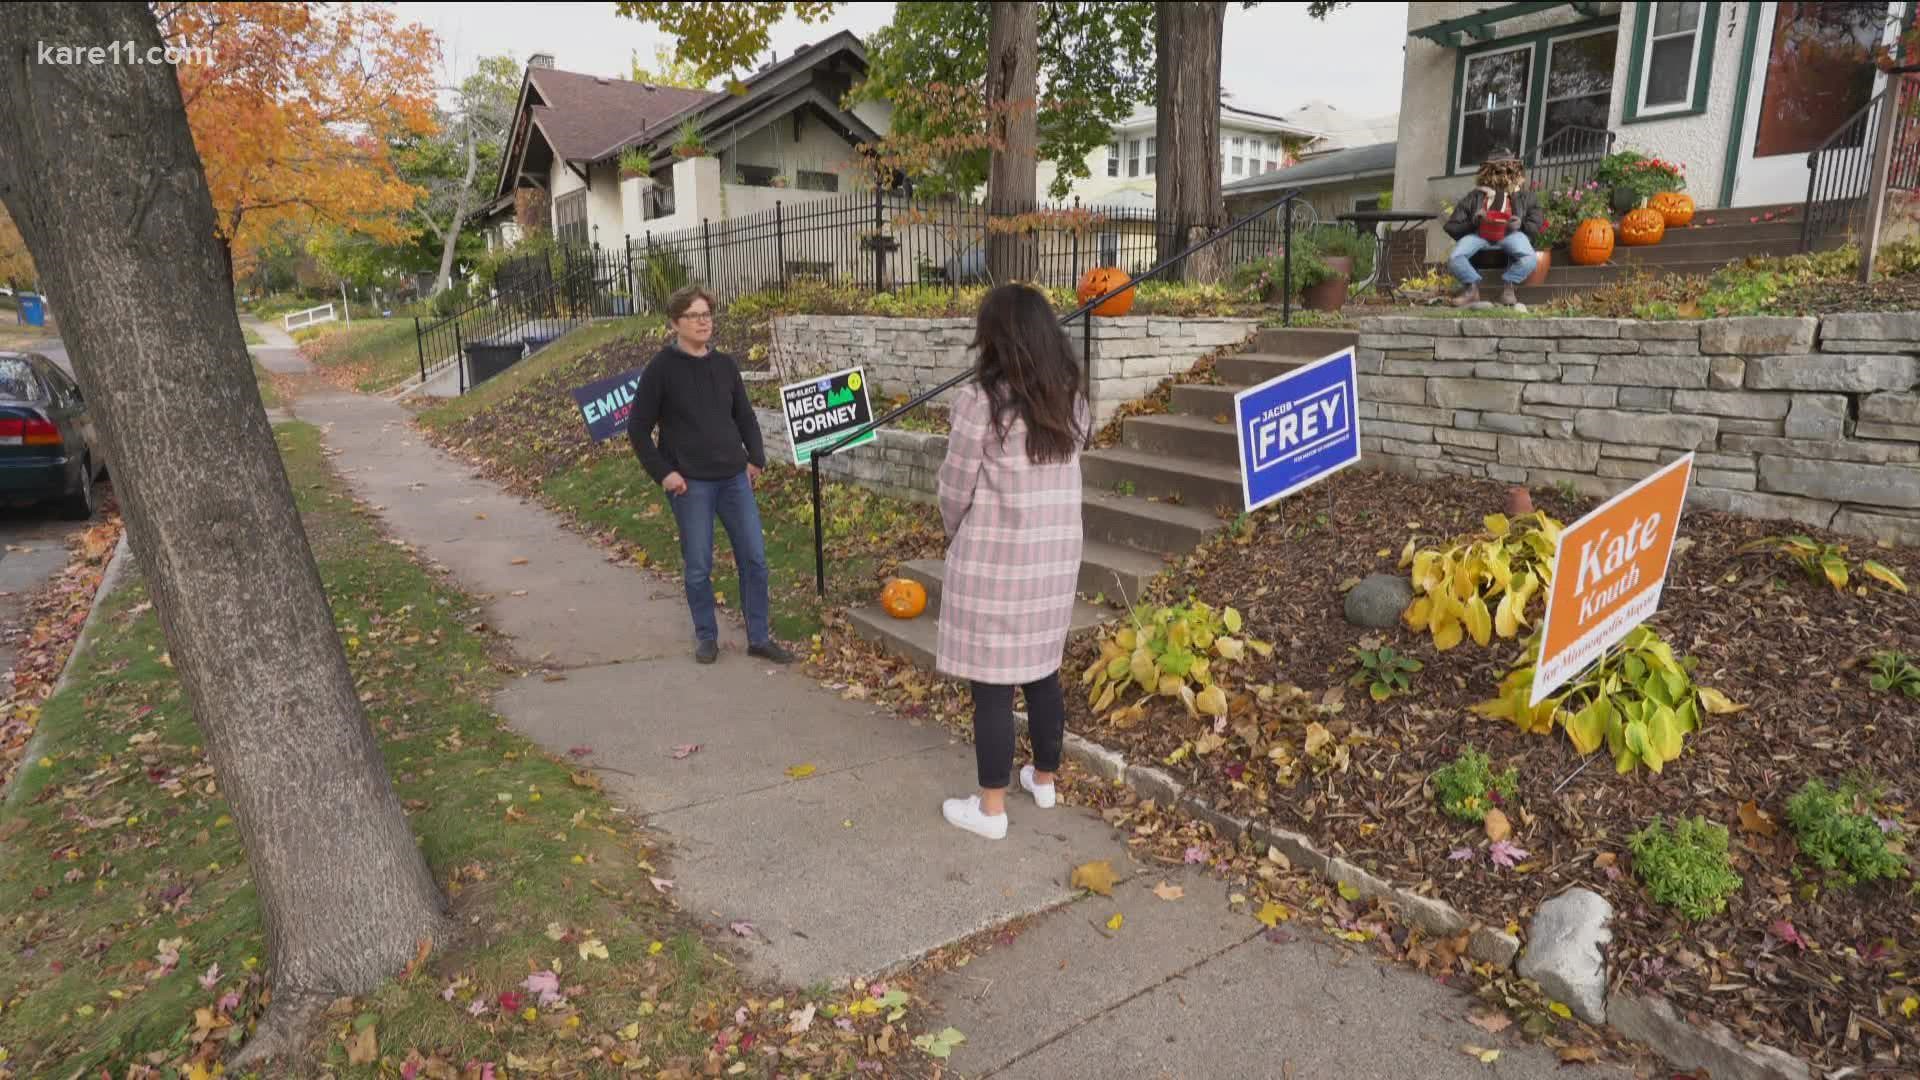 According to experts, political yard signs can be traced back to ancient Romans who promoted their preferred candidates on the walls of their homes.